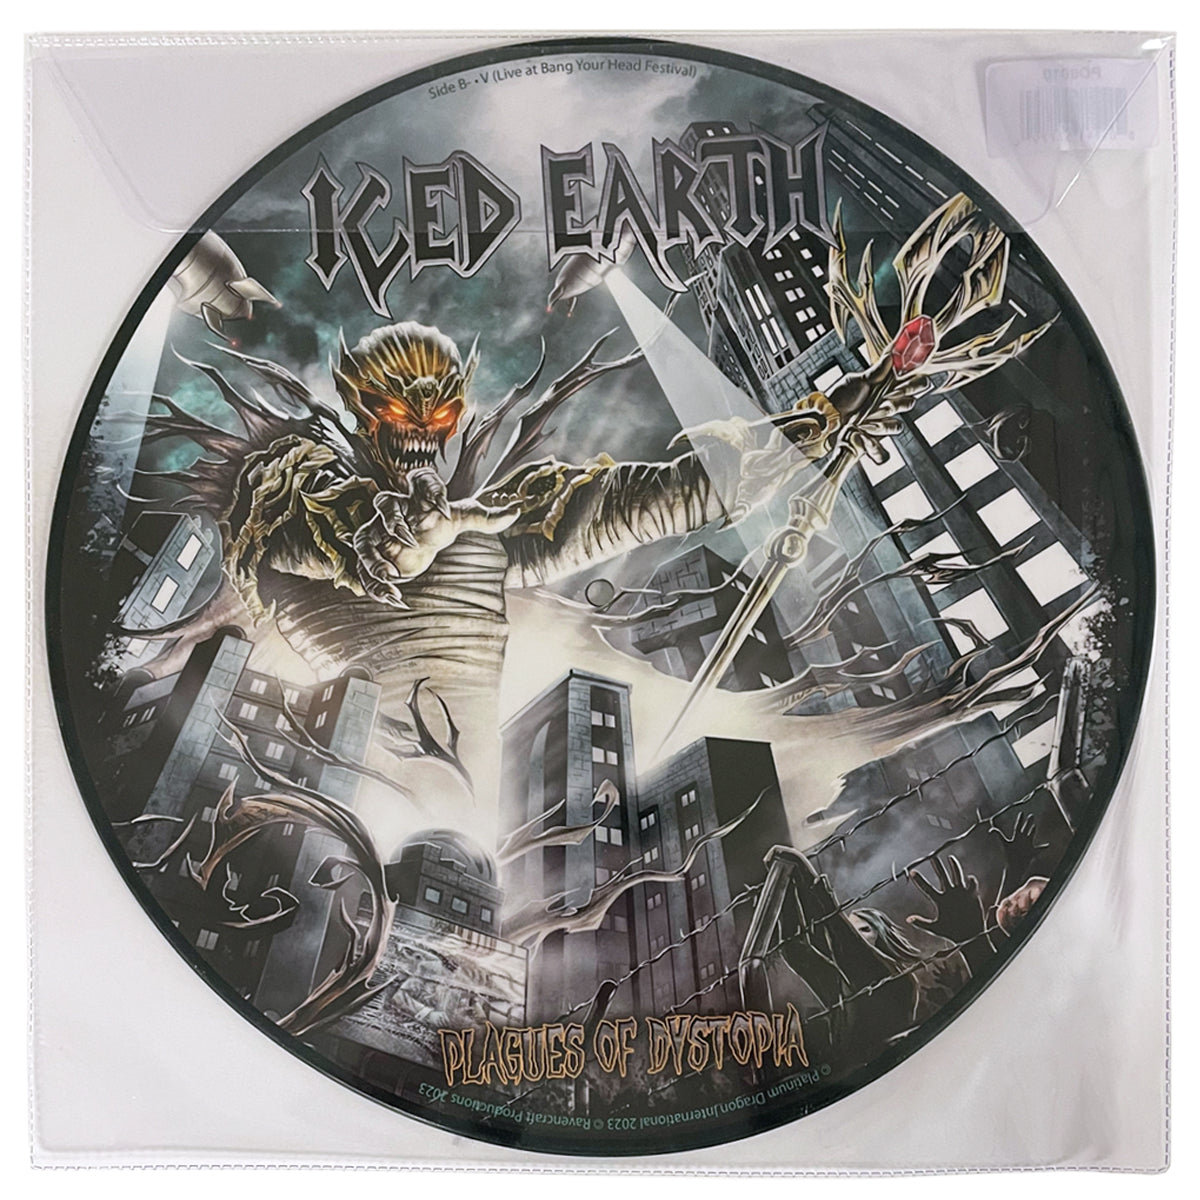 ICED EARTH Plagues of Dystopia EP (EU Record Store Day Exclusive Picture Disc)